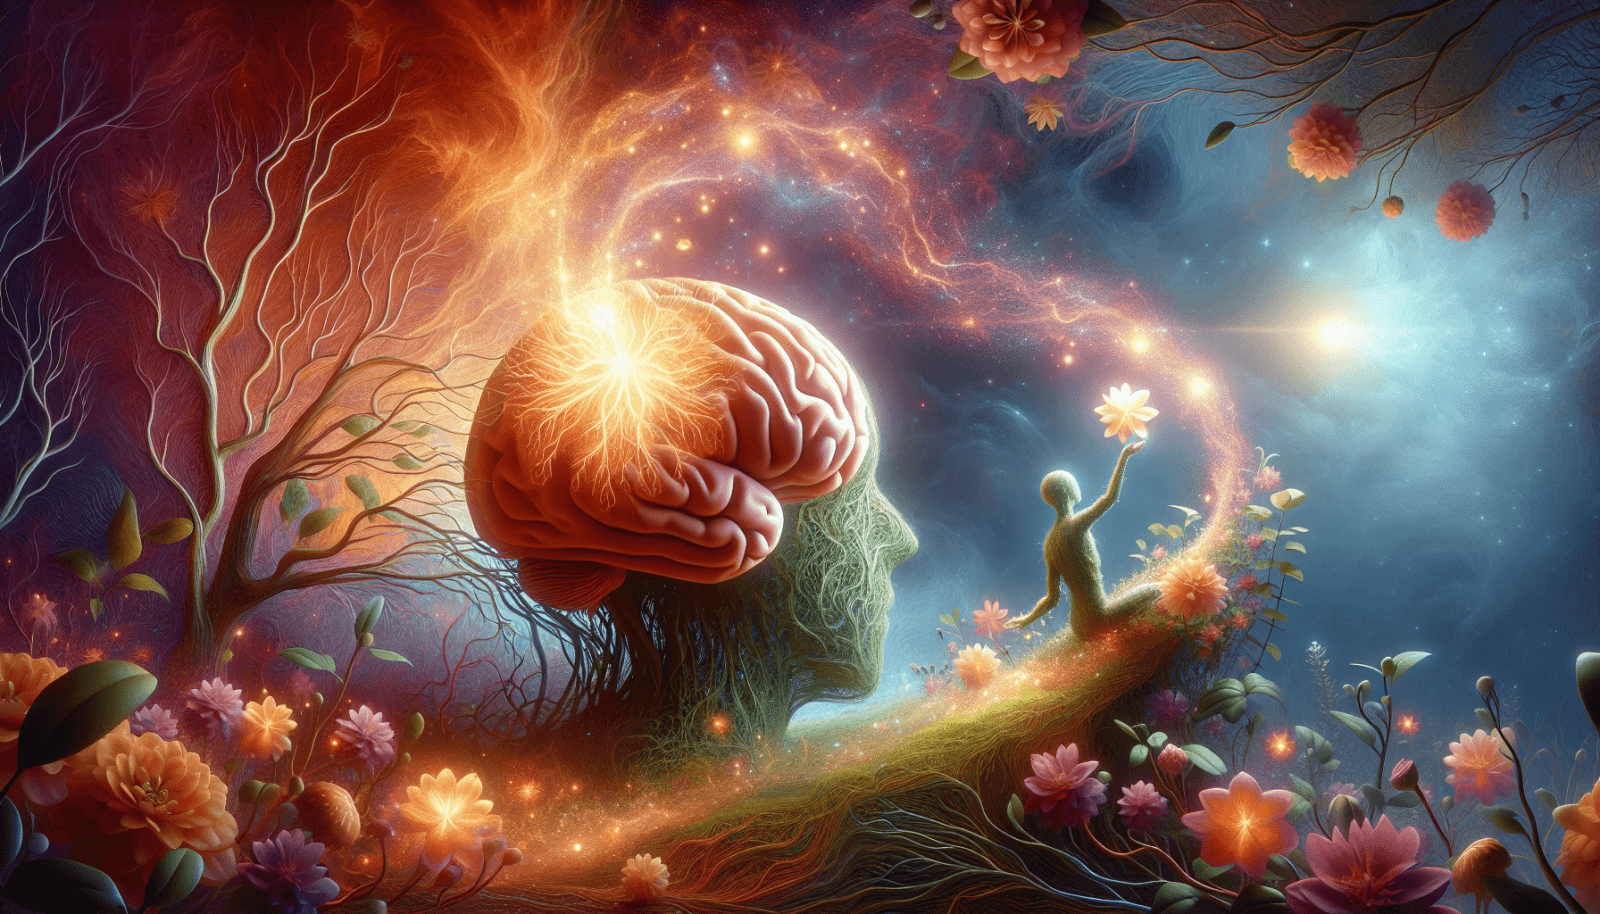 An artistic depiction of a human brain superimposed on a silhouette of a human head beside a tree, set against a cosmic background with a figure on a grassy path reaching toward a shining flower, all infused with vibrant colors and light.